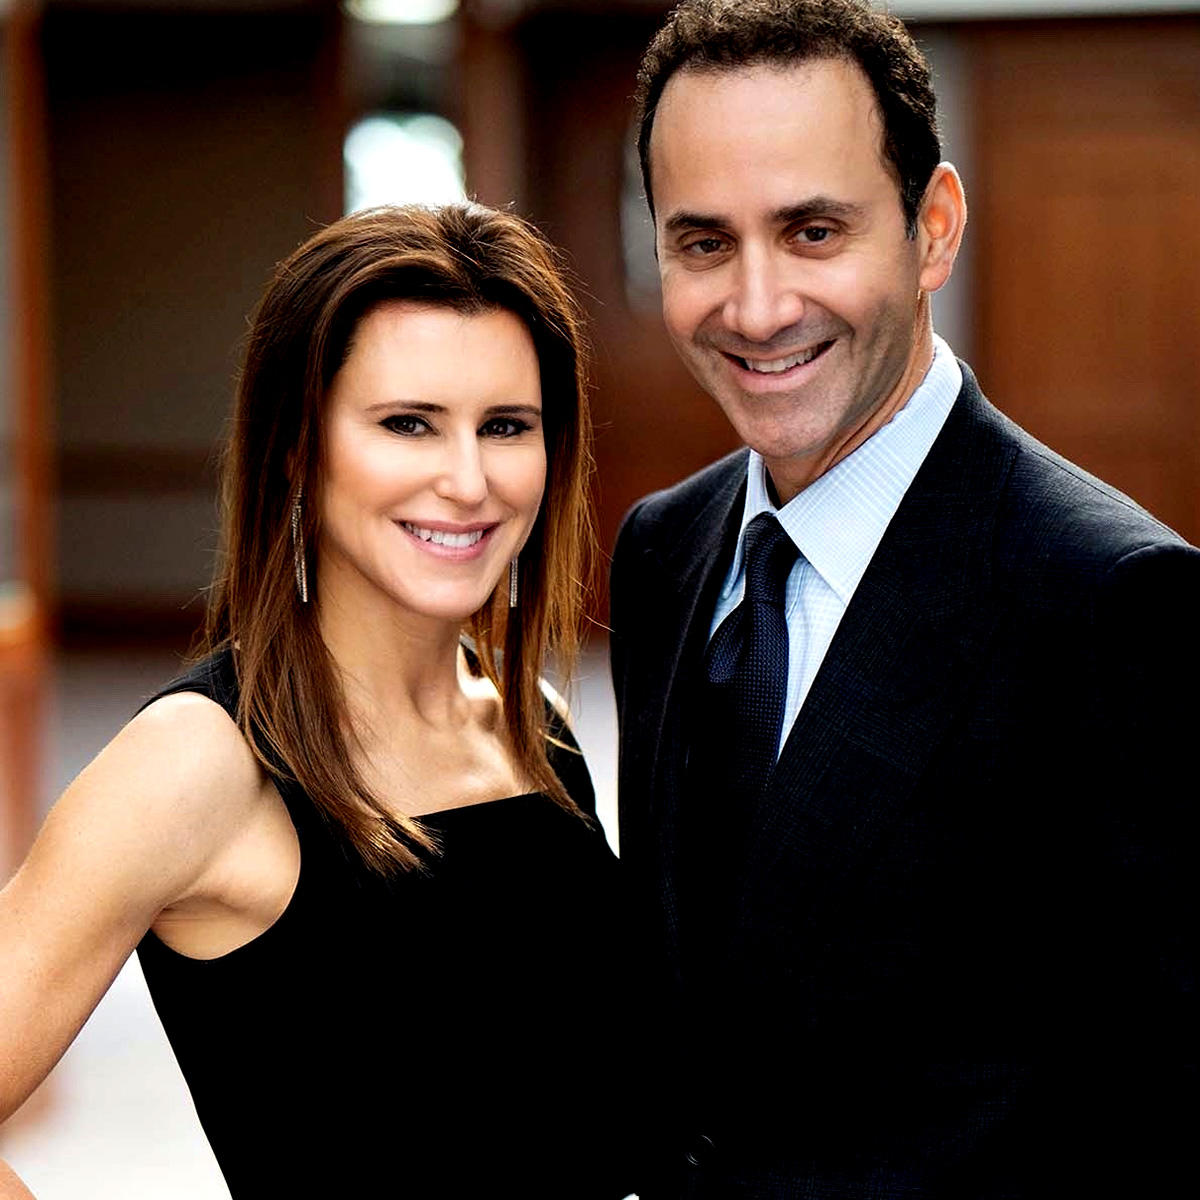 Drs. Elie and Jody Levine, experts in the fields of plastic surgery and dermatology, work closely together to help patients achieve a radiant complexion. Combining unique elements of cosmetic surgery with the latest advancements in the field of dermatology, Drs. Elie and Jody Levine are proud to offer the highest level of patient care at Dermatology, Laser & Surgery of Carnegie Hill.